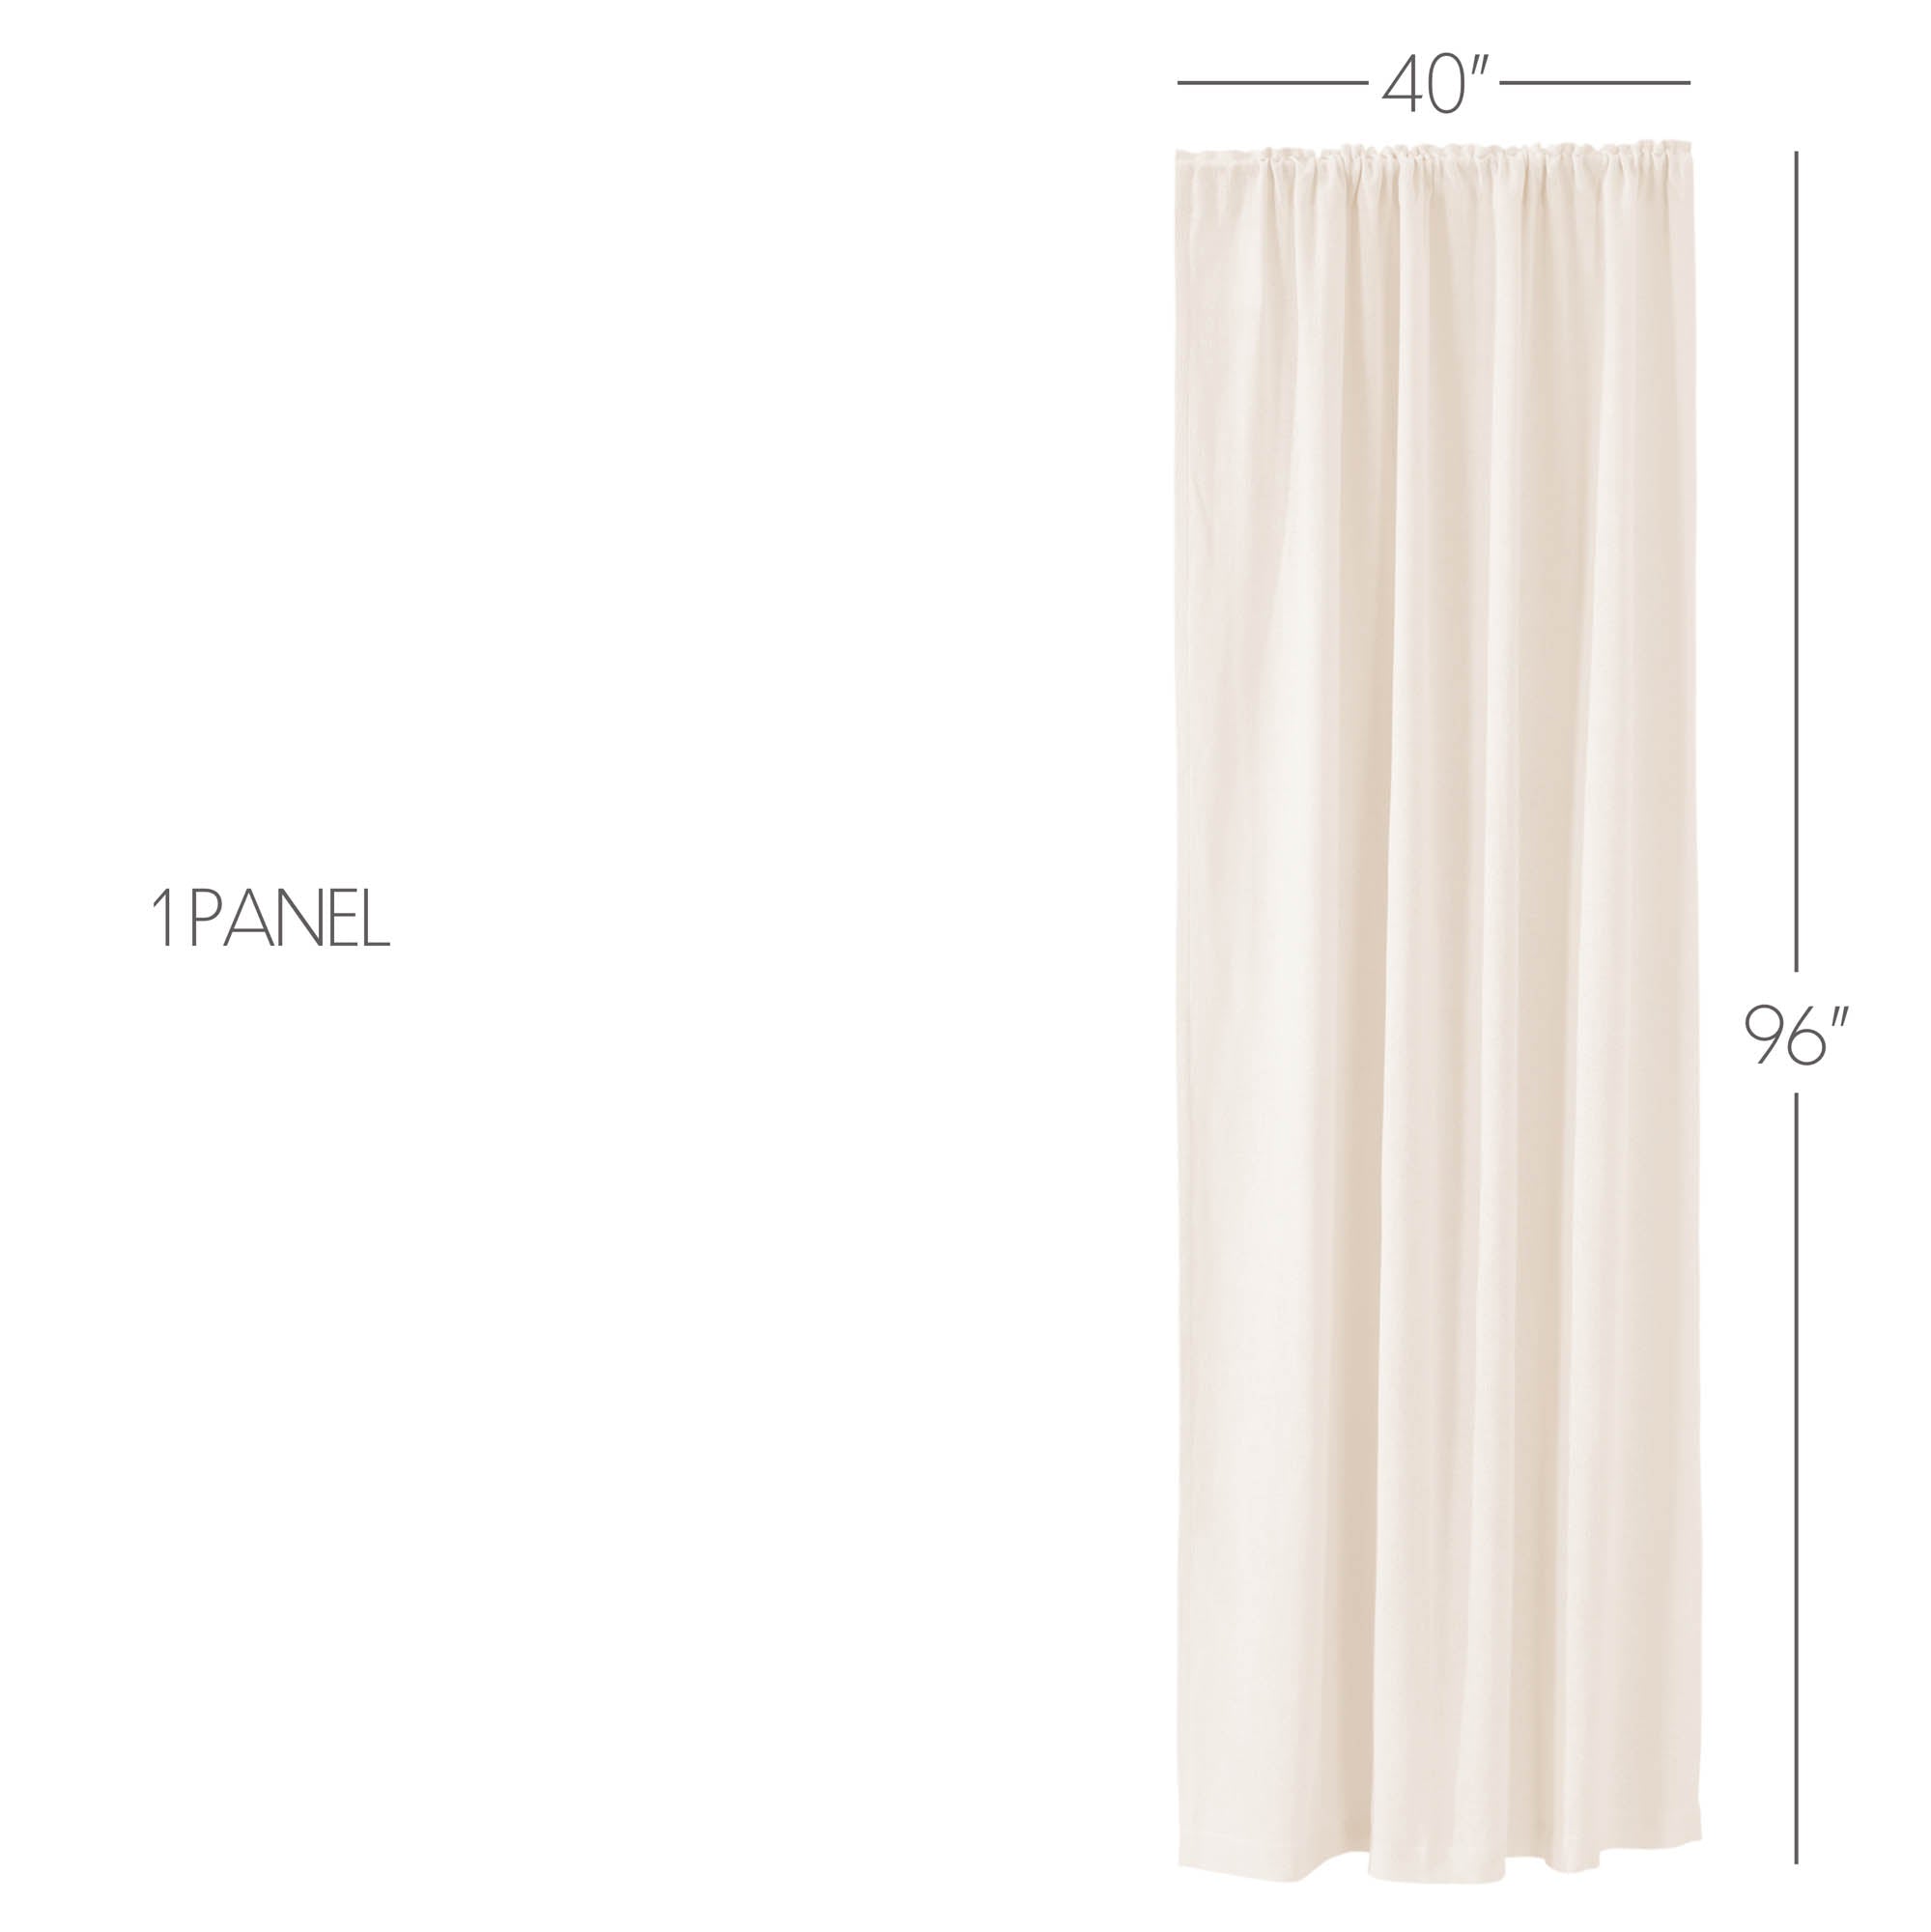 Simple Life Flax Antique White Panel Curtain 96"x40" VHC Brands